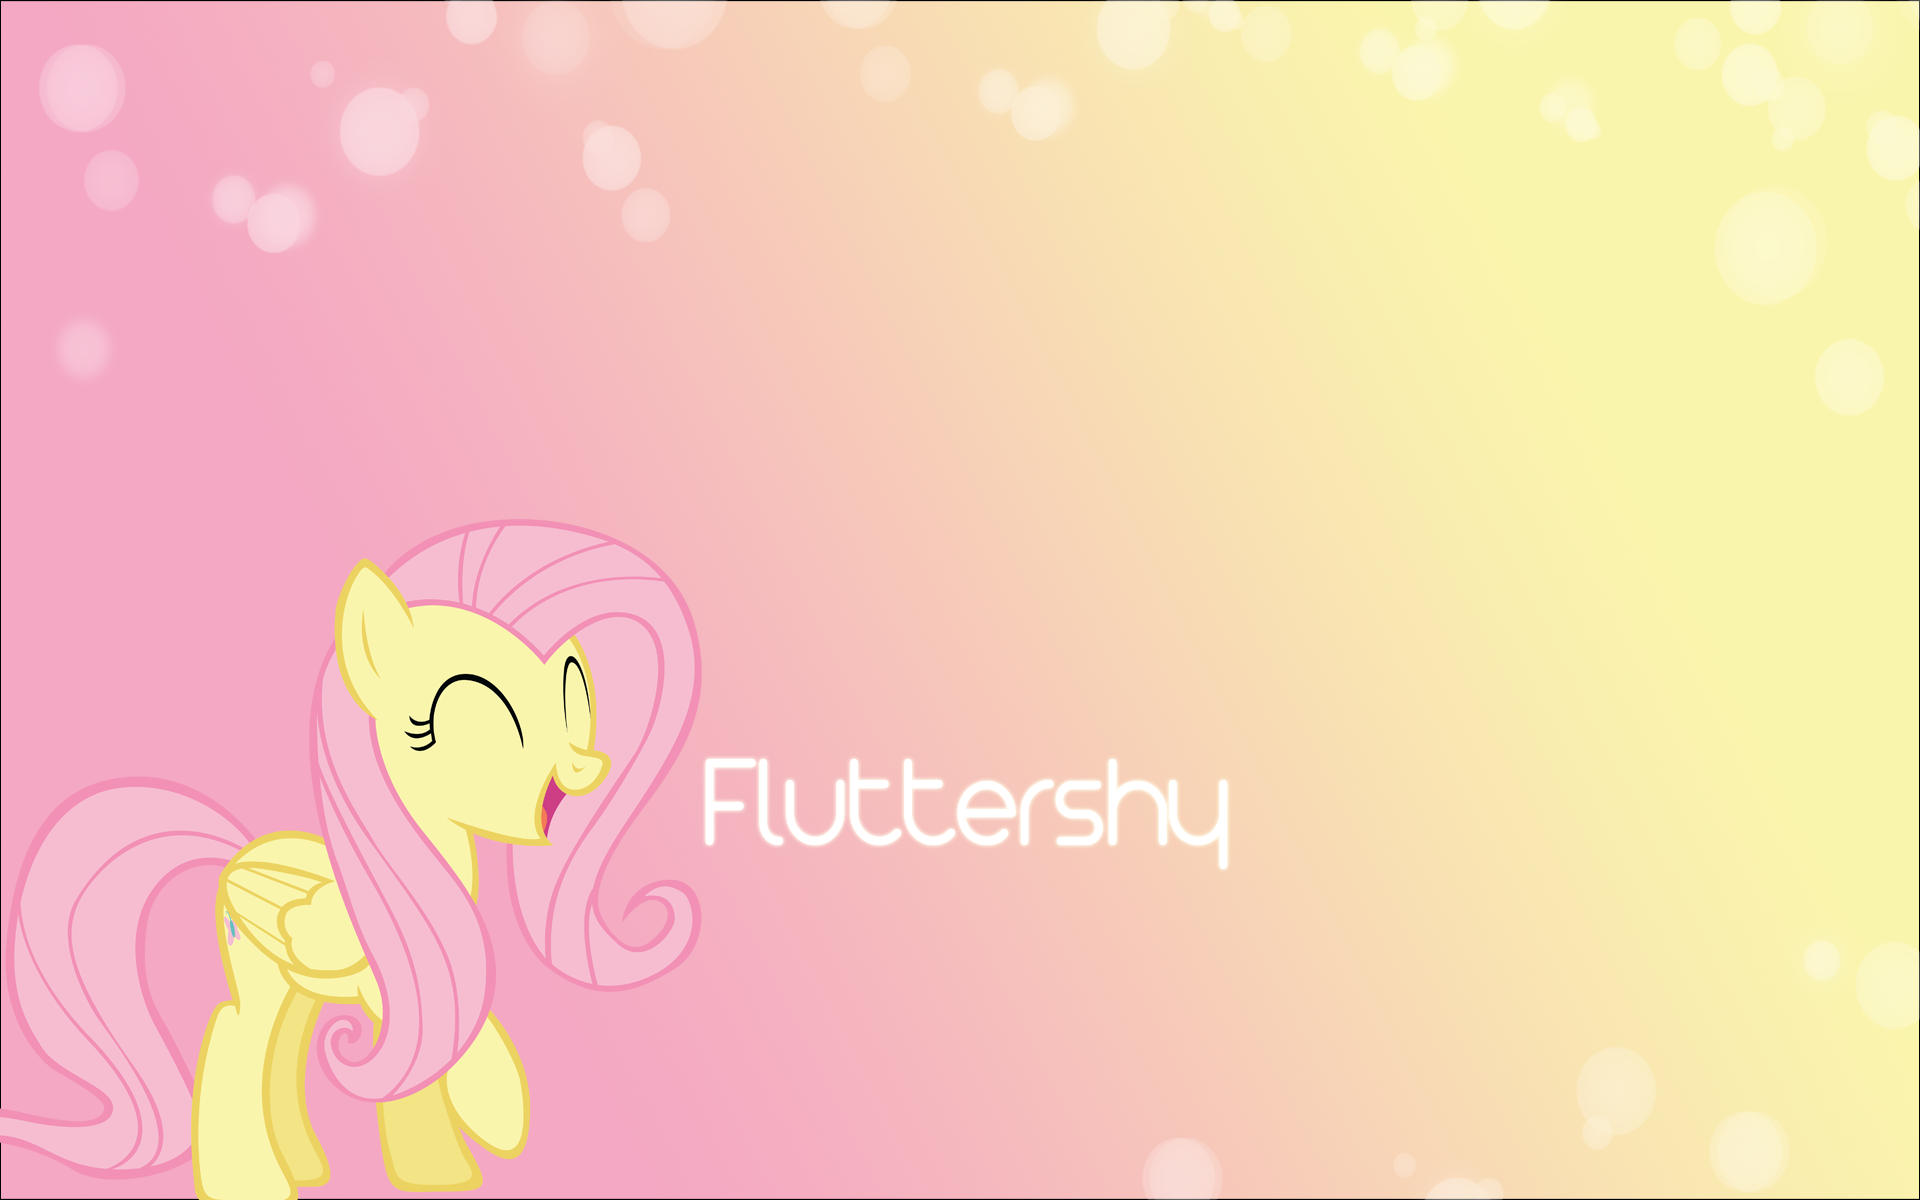 Fluttershy wallpaper by RainbowCrab and SoundmOtion